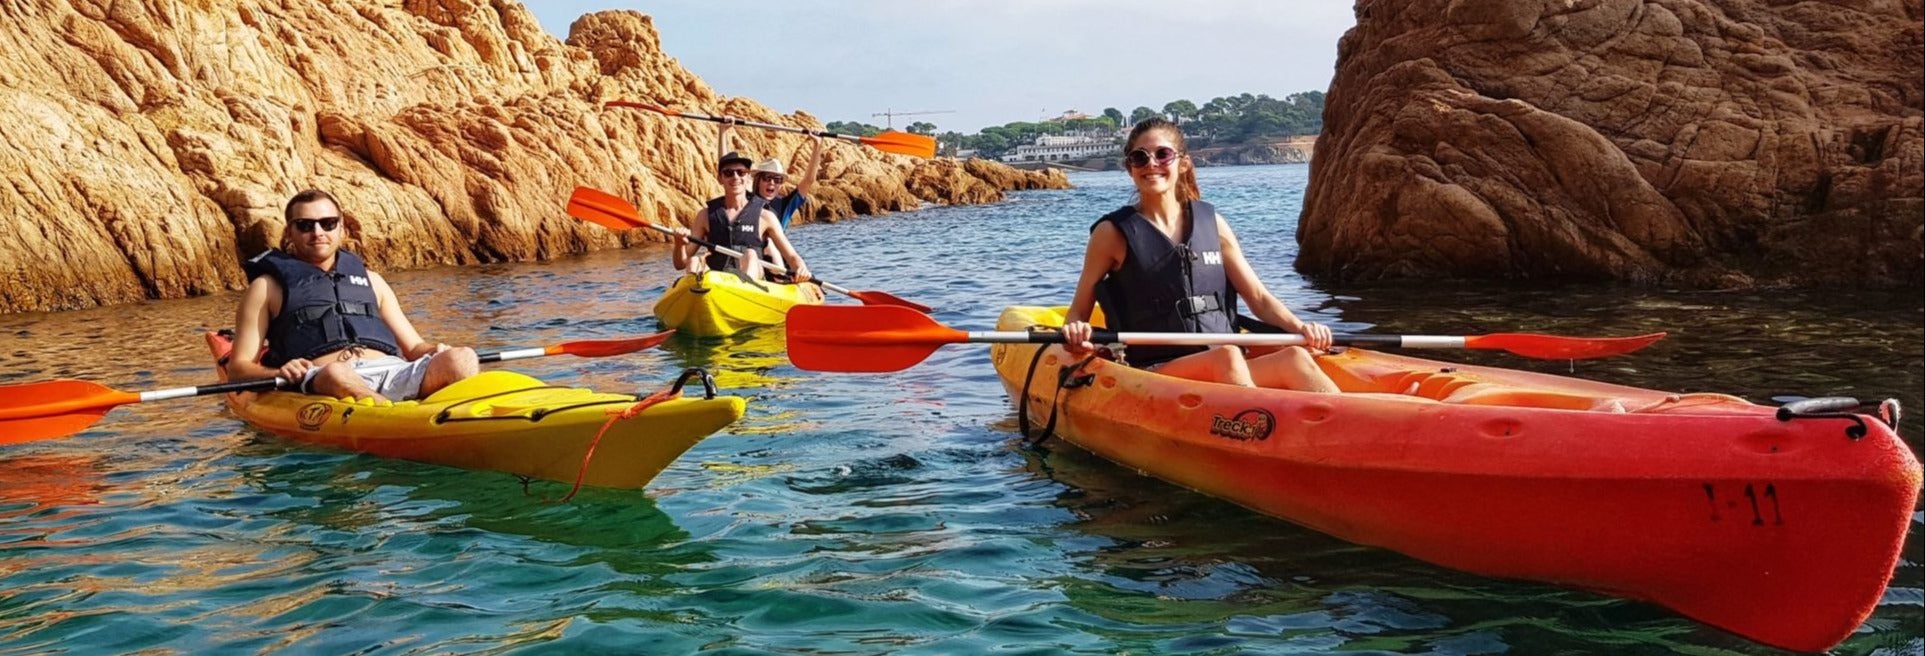 Hiking, Kayaking and Snorkelling in the Costa Brava